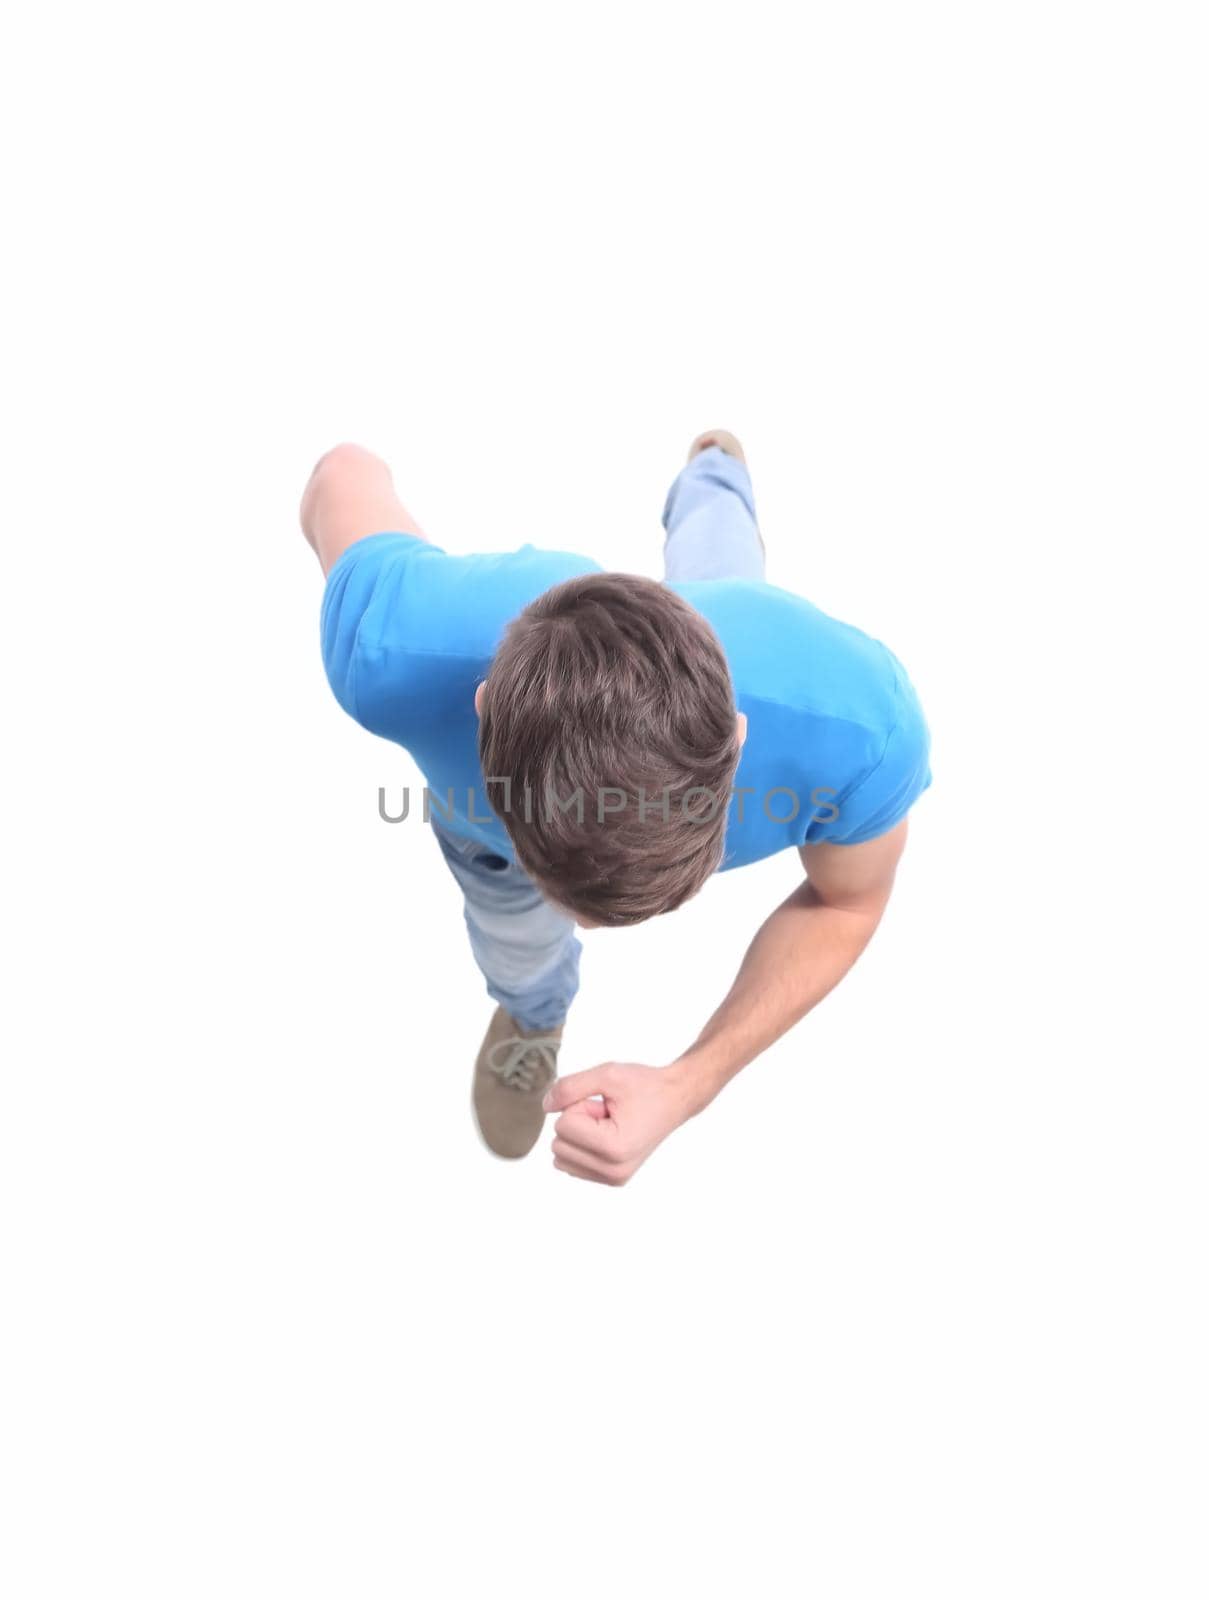 top view. young man stepping forward. isolated on white background